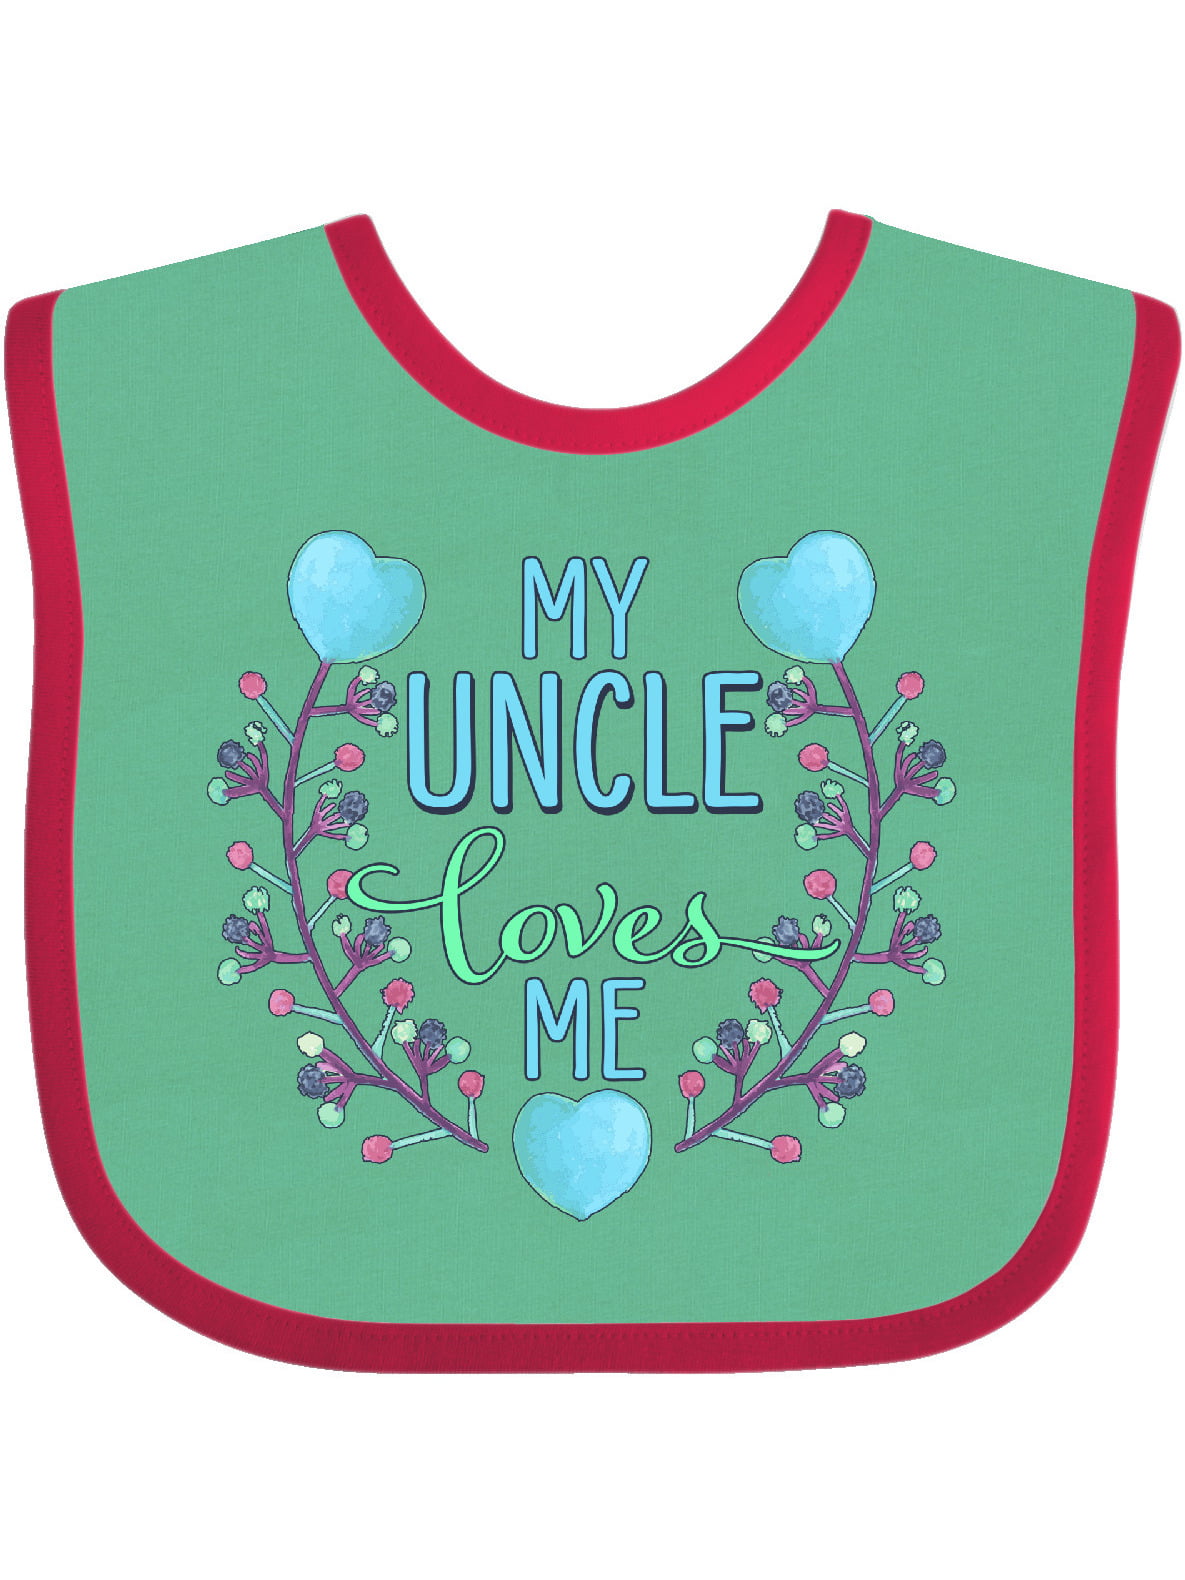 My Uncle Loves Me with Flowers and Hearts Baby Bib - Walmart.com ...